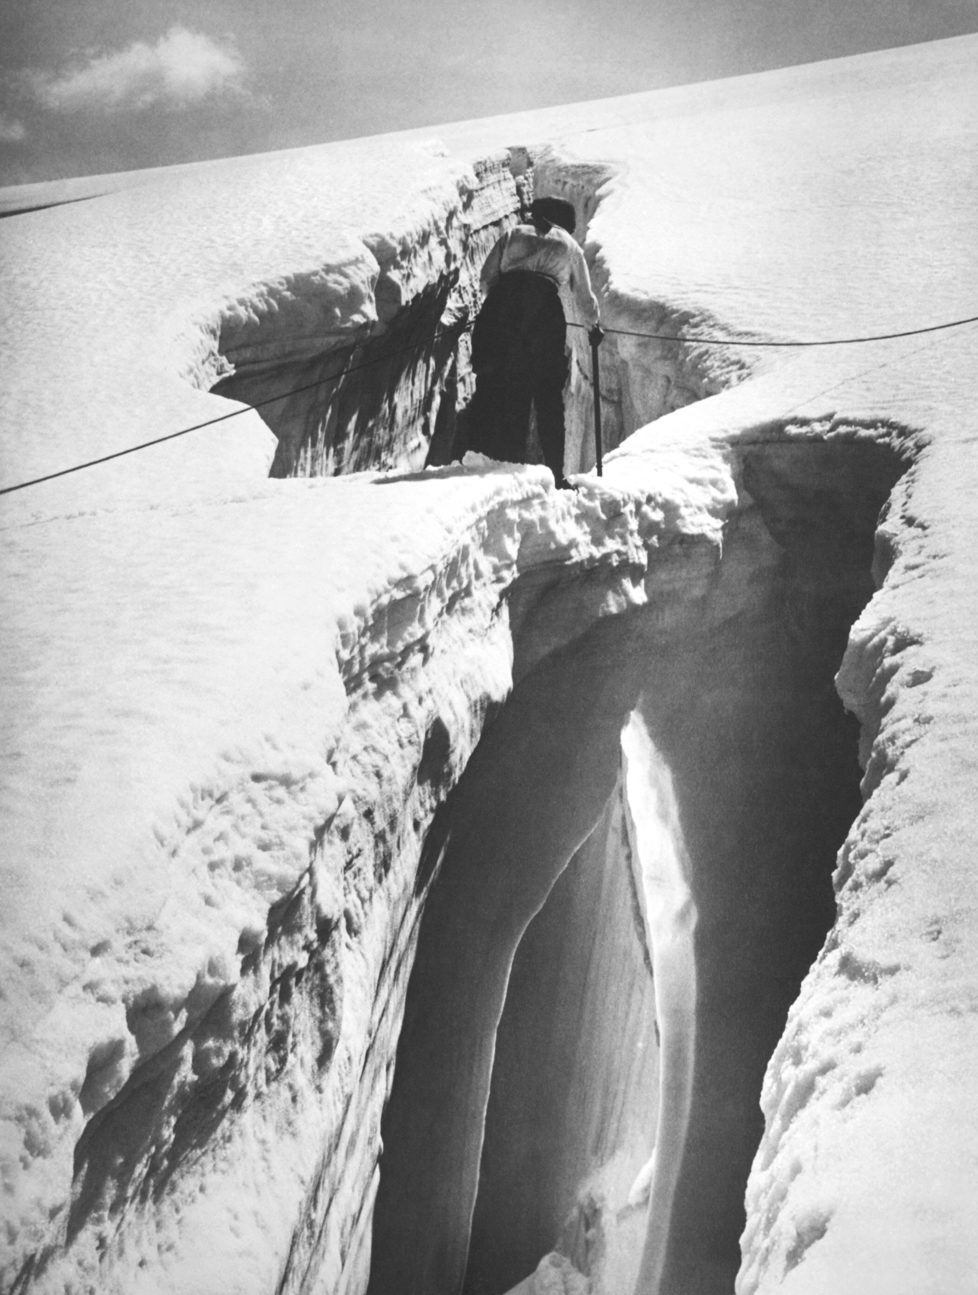 A mountain climber in the Swiss Alps cautiously traverses an ice bridge over a crevasse, Switzerland, circa 1928. (Photo by Underwood Archives/Getty Images)